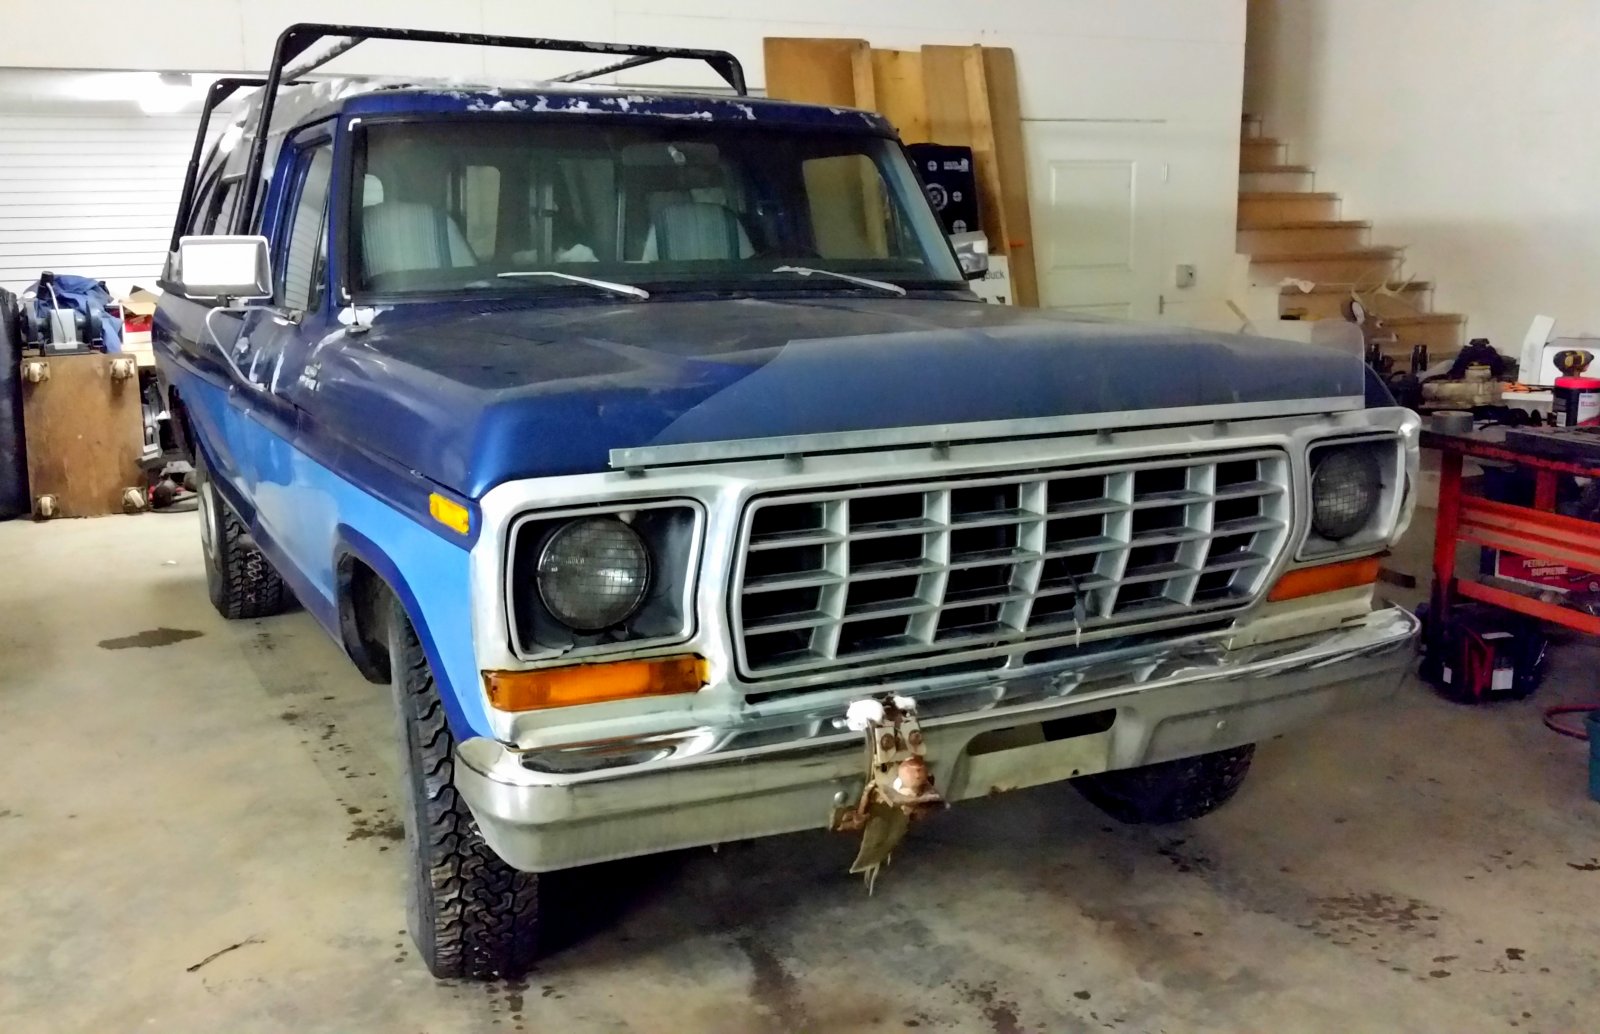 The Story Of Grandpa's Old Truck Turned Into a Fully Restored Diesel Dentside 7.jpg